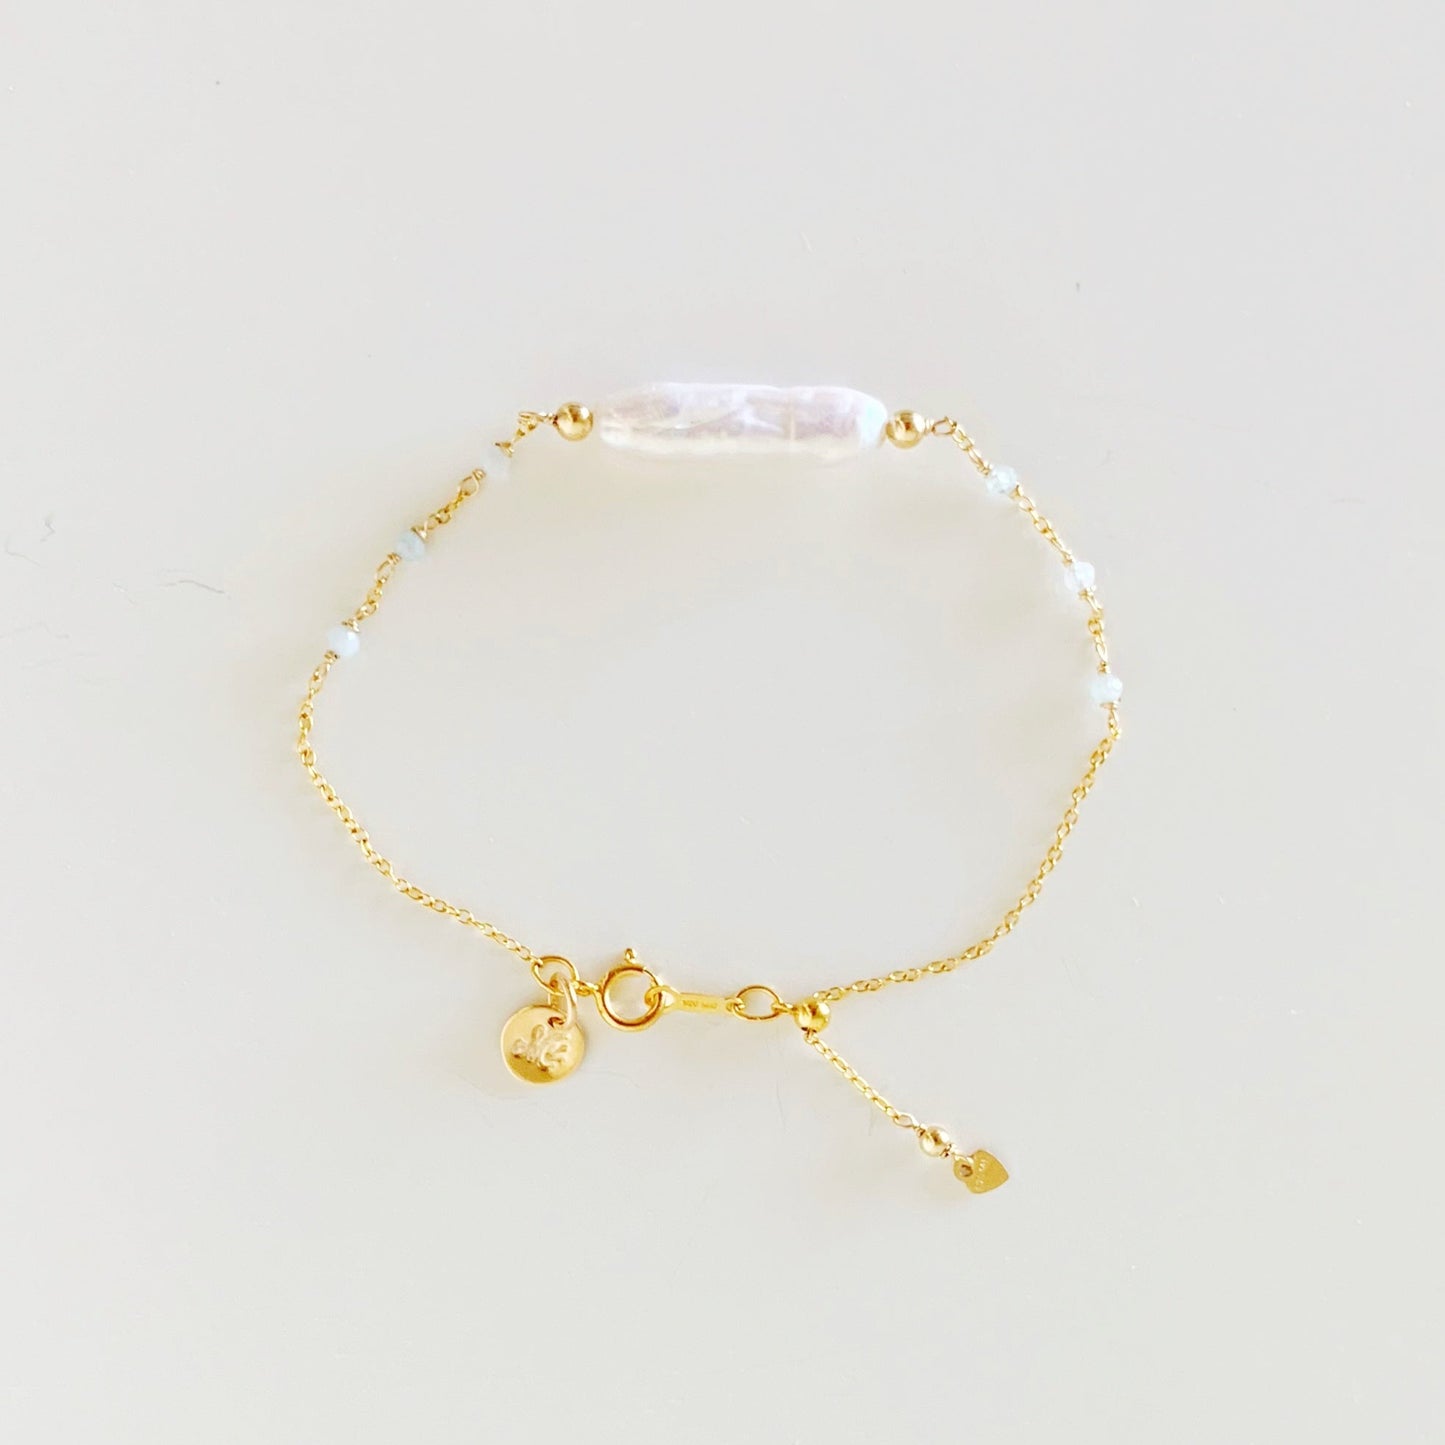 the truro bracelet by mermaids and madeleines is an adjustable chain based bracelet with freshwater stick pearl at the center and microfaceted aquamarine beads on the chain on either side. the chain and findings are 14k gold filled and there's a slide bead by the spring ring to tighten bracelet. this piece is photographed in a top down view on a white surface